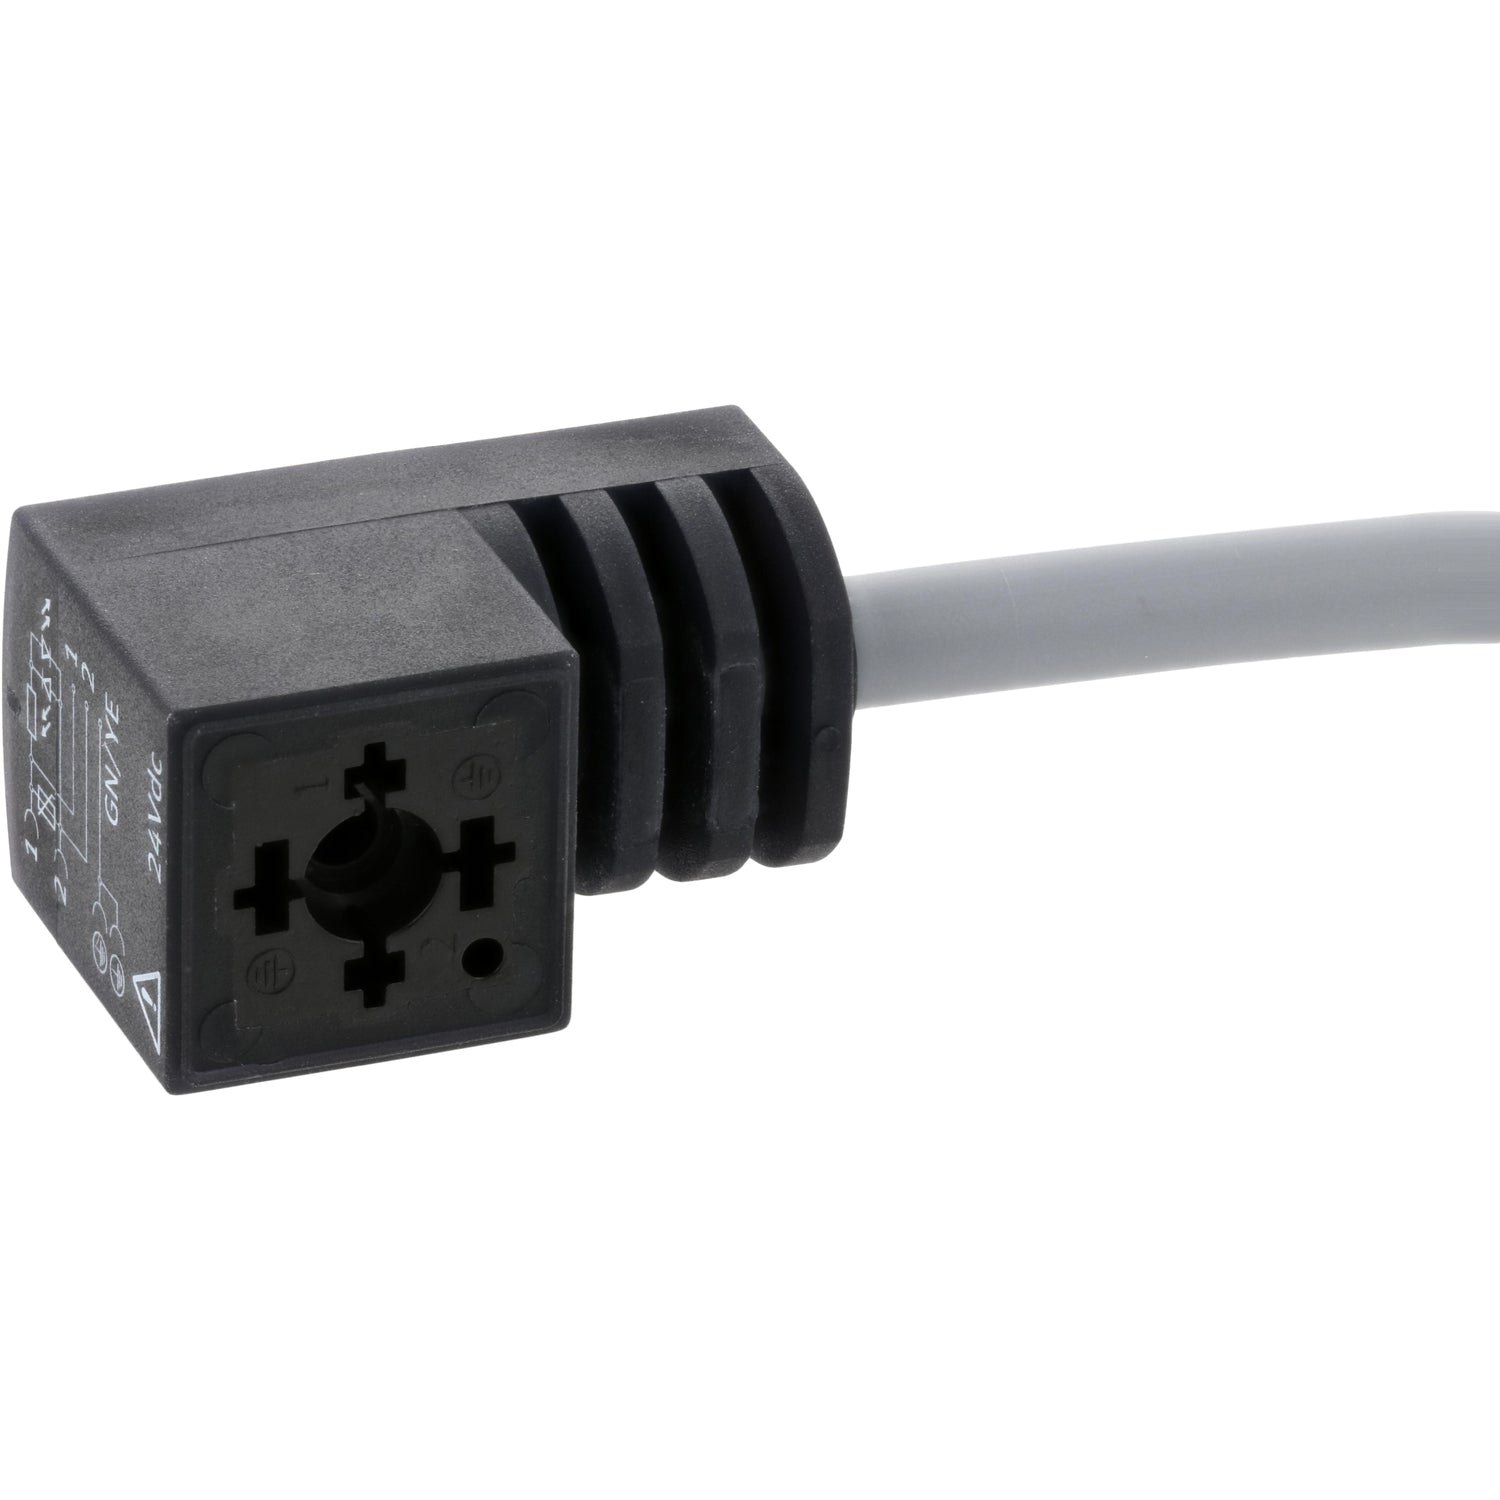 Black plastic plug connected to a grey cable on white background. 